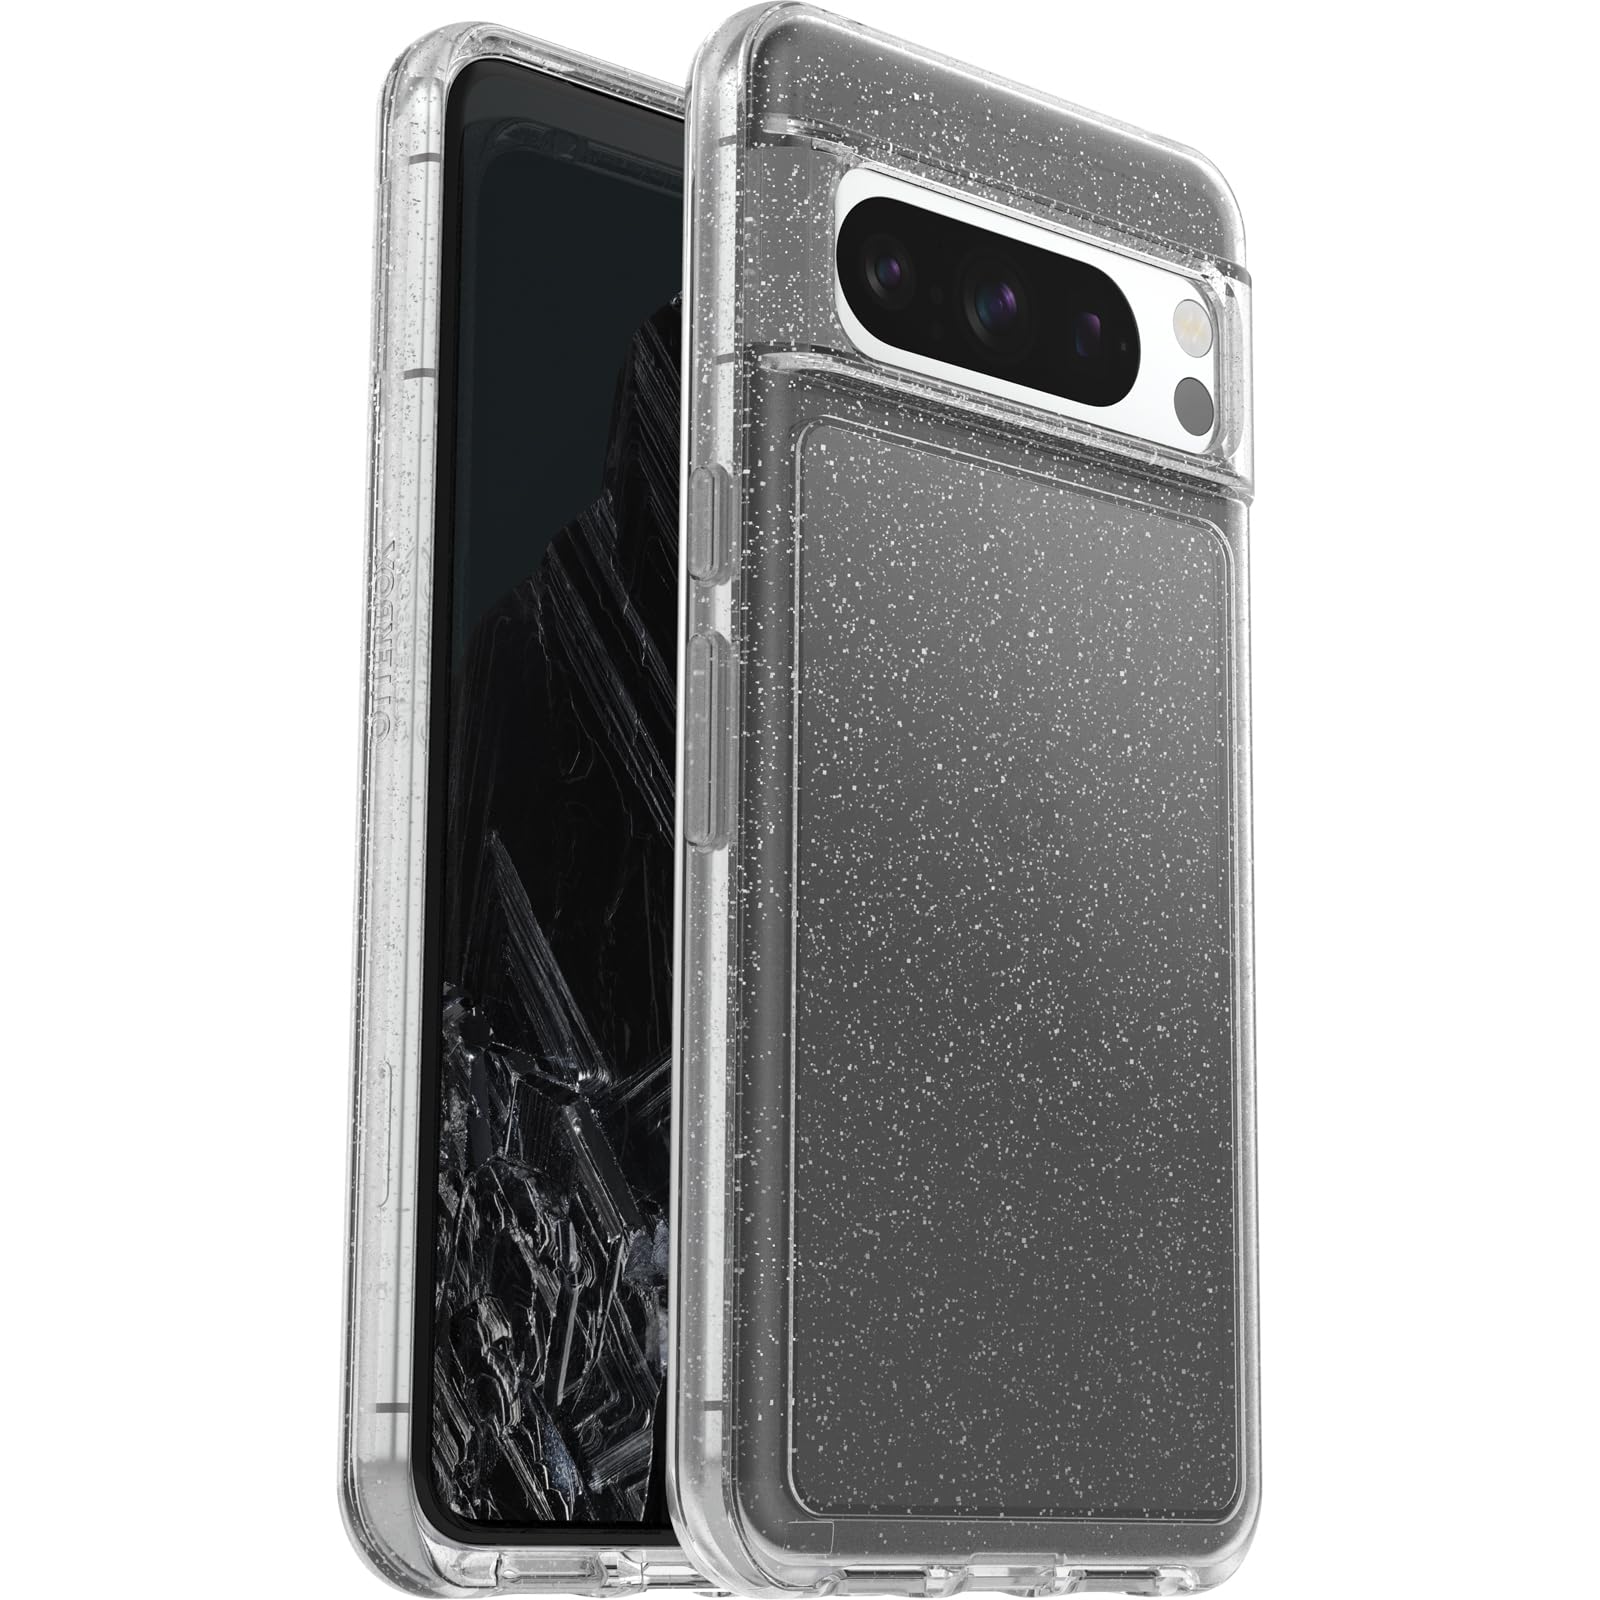 OtterBox Google Pixel 8 Pro Symmetry Series Clear Case - STARDUST (Clear/Glitter), ultra-sleek, wireless charging compatible, raised edges protect camera & screen